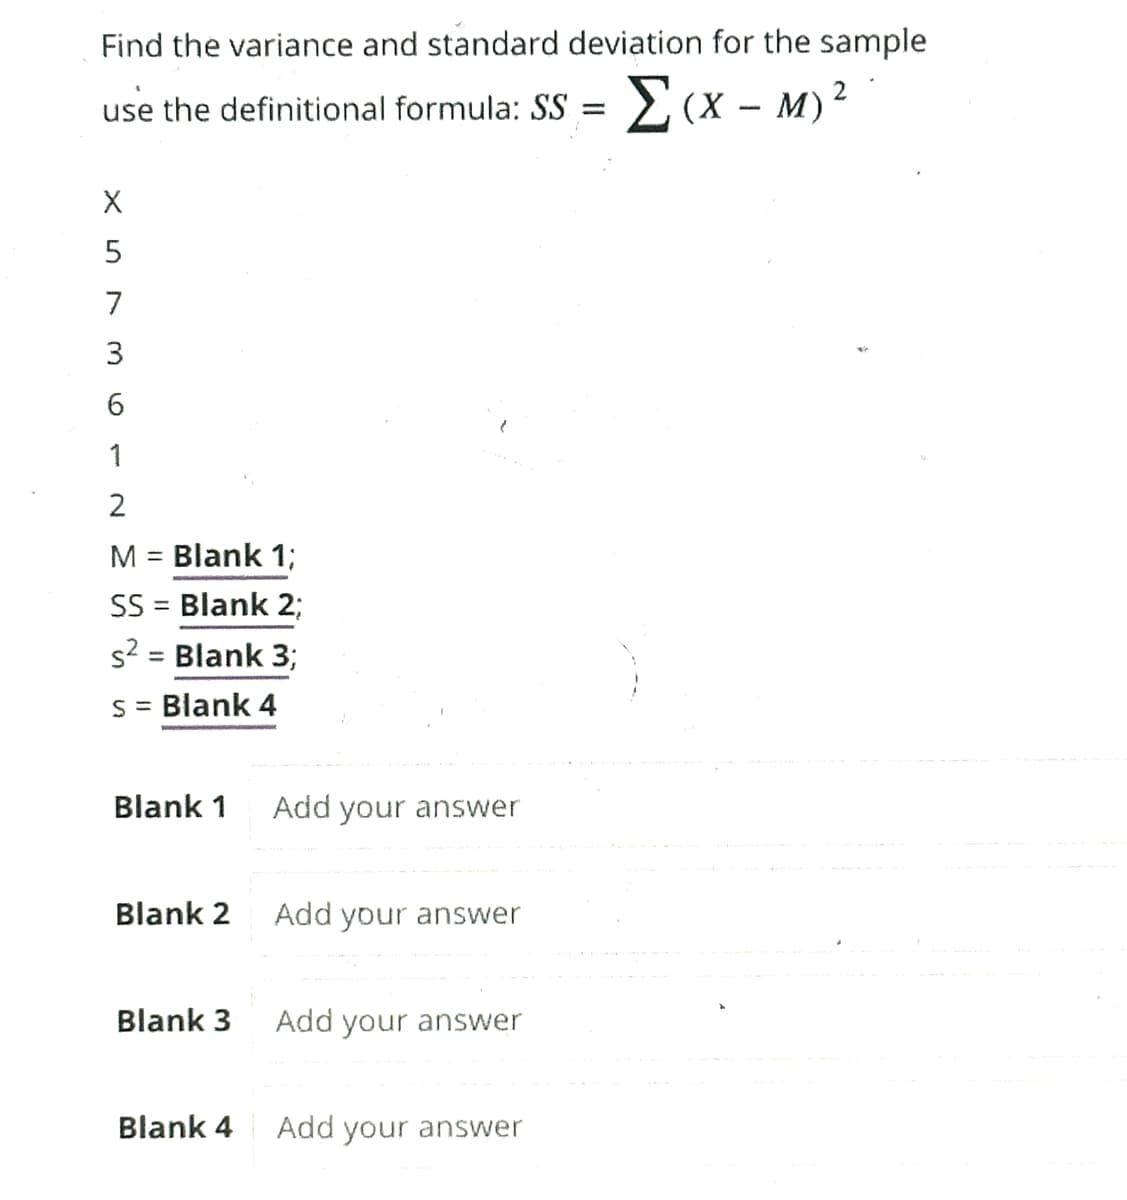 Find the variance and standard deviation for the sample
use the definitional formula: SS = [(x -M) ²
XS36
5
7
1
2
M = Blank 1;
SS = Blank 2;
s² = Blank 3;
s = Blank 4
Blank 1
Blank 2
Blank 3
Blank 4
Add your answer
Add your answer
Add your answer
Add your answer